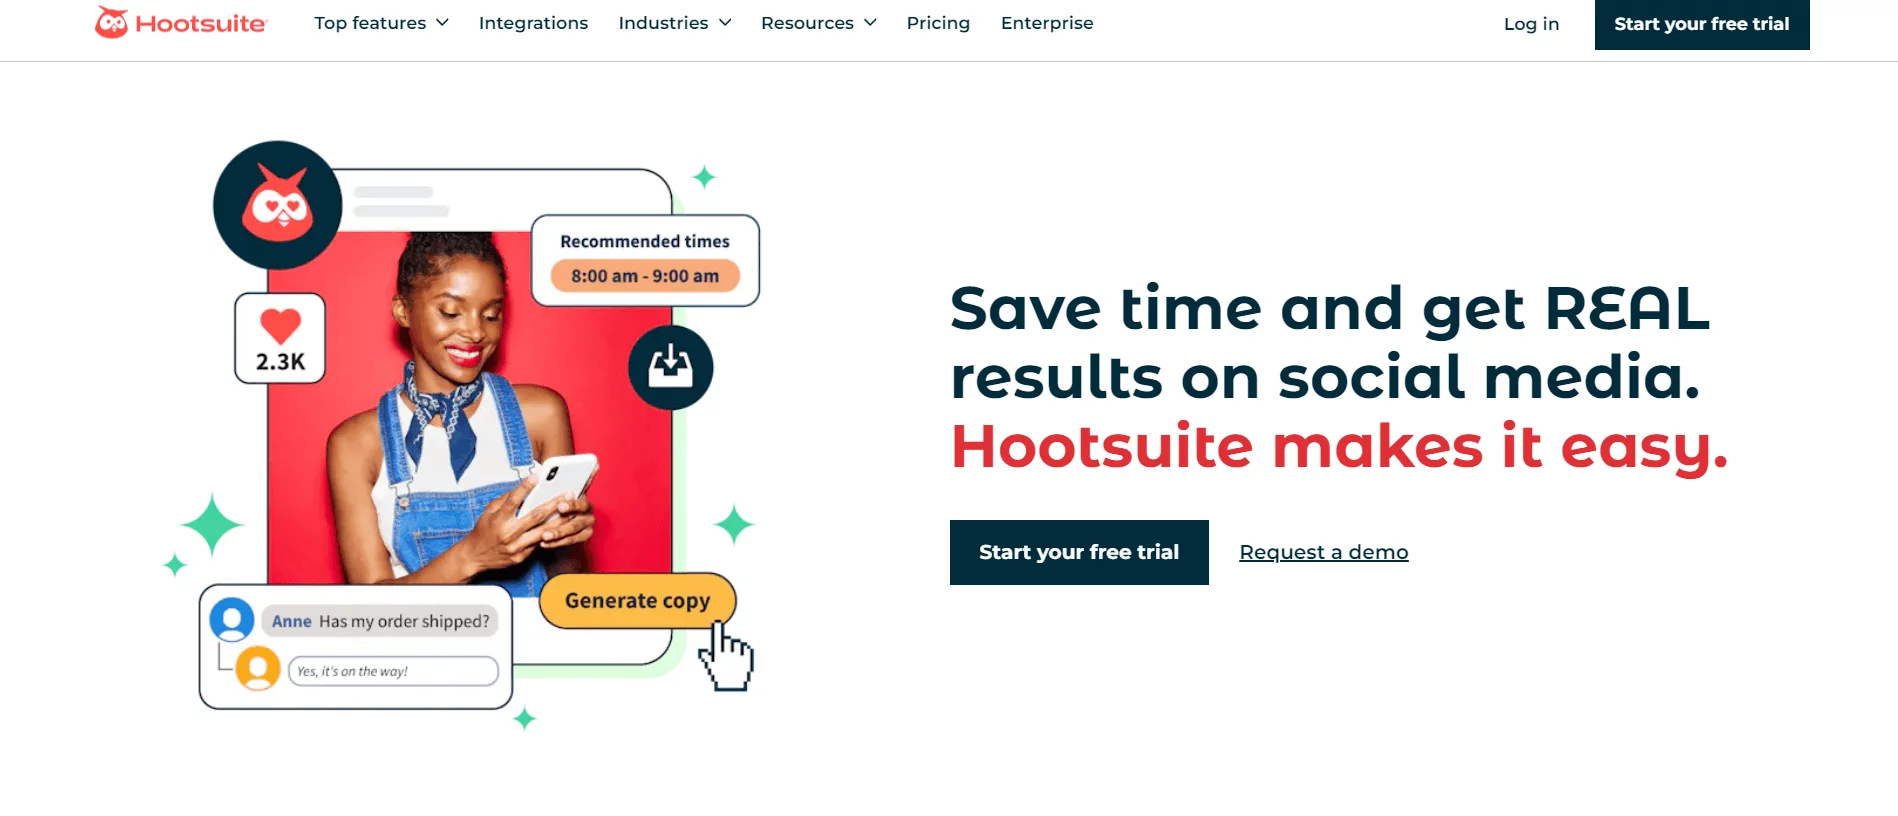 Homepage of Hootsuite featuring a smiling woman using a smartphone, promoting the ease of obtaining real results on social media with features like recommended posting times and message automation.